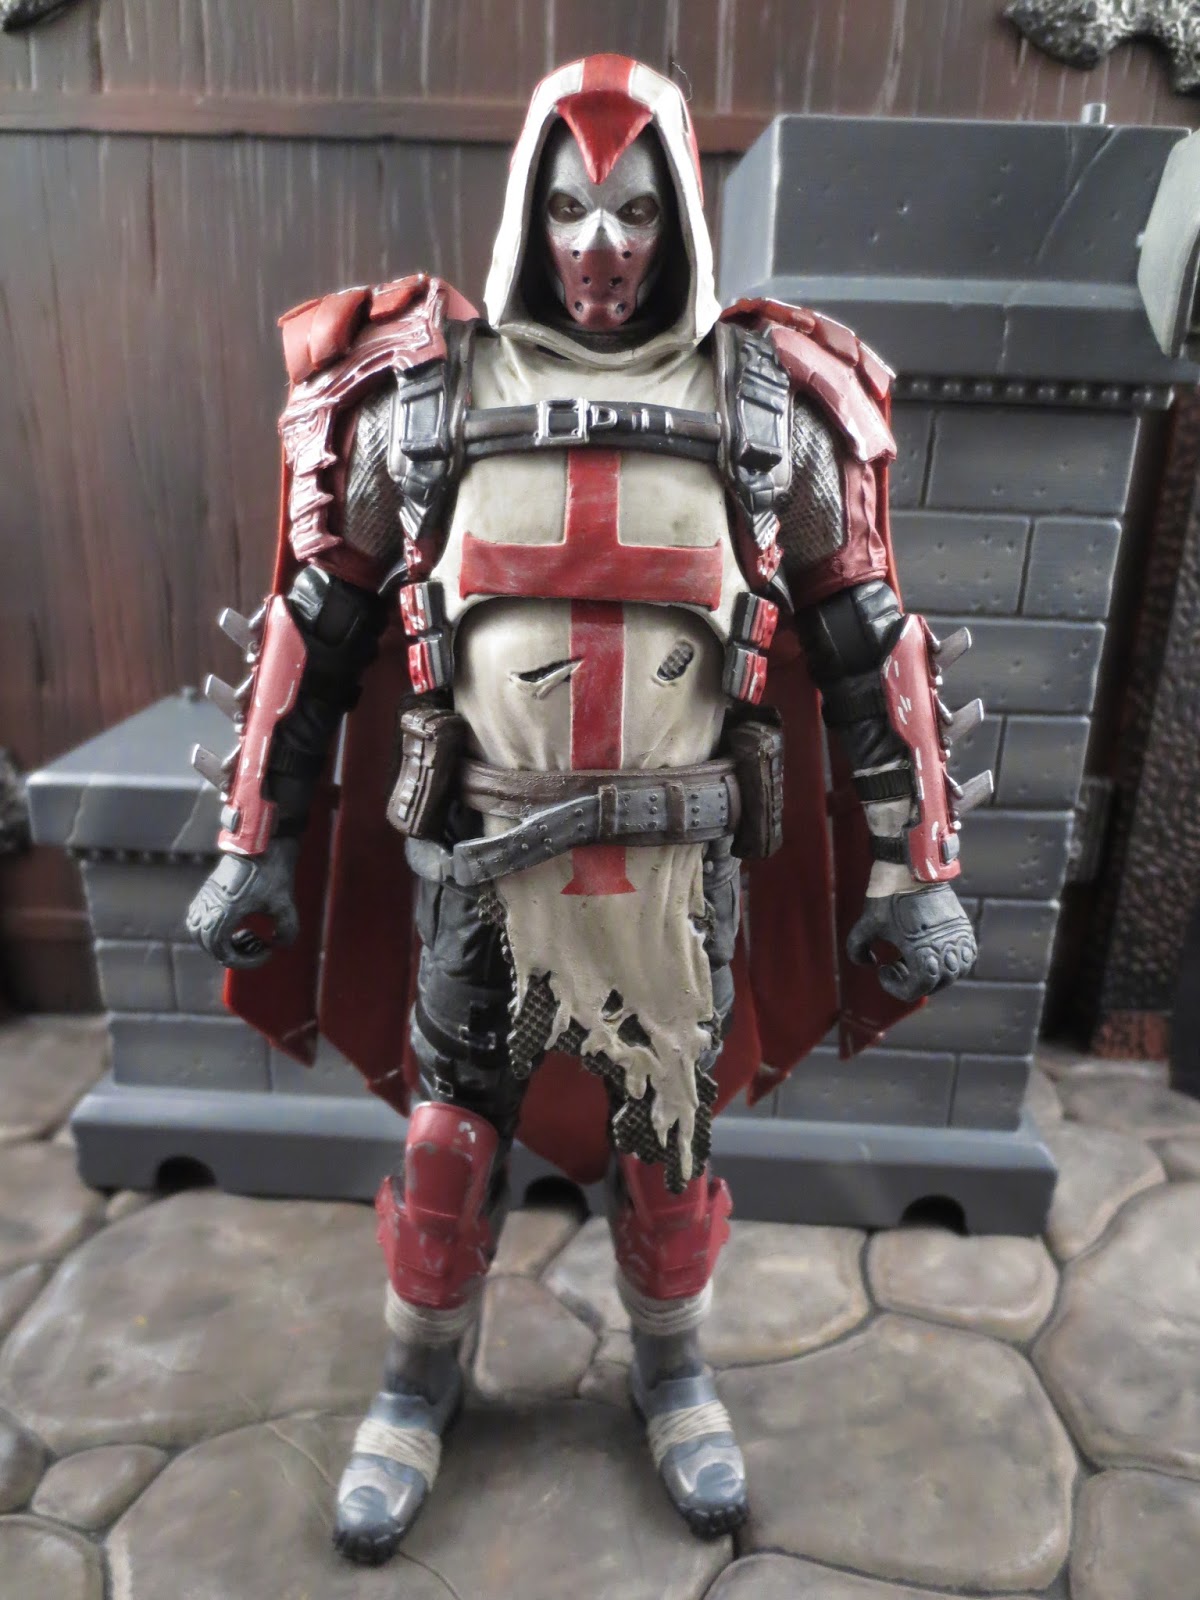 Action Figure Review: Azrael from Batman: Arkham Knight by DC Collectibles.